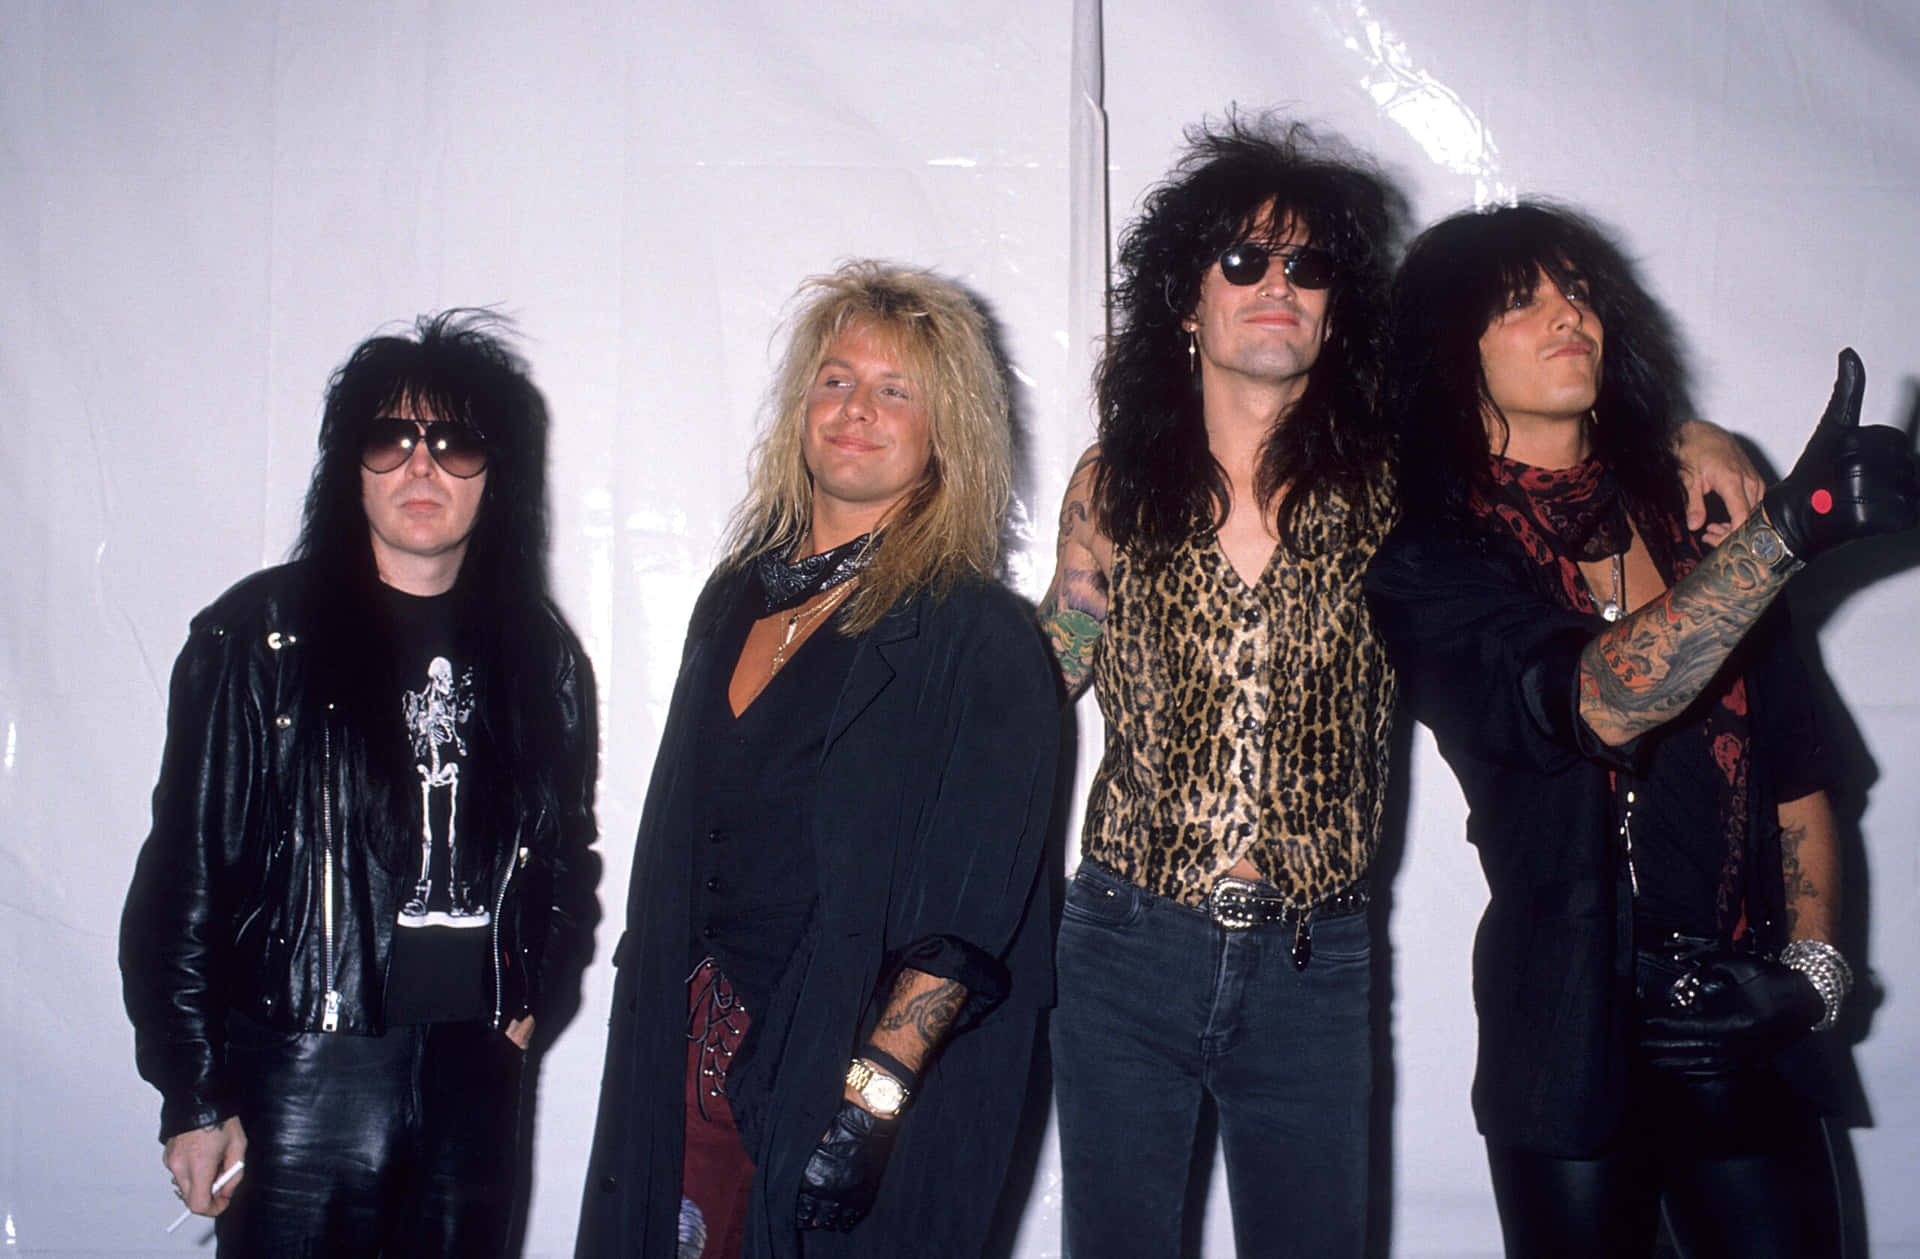 Motley Crue, the iconic glam rock band of the 80s Wallpaper